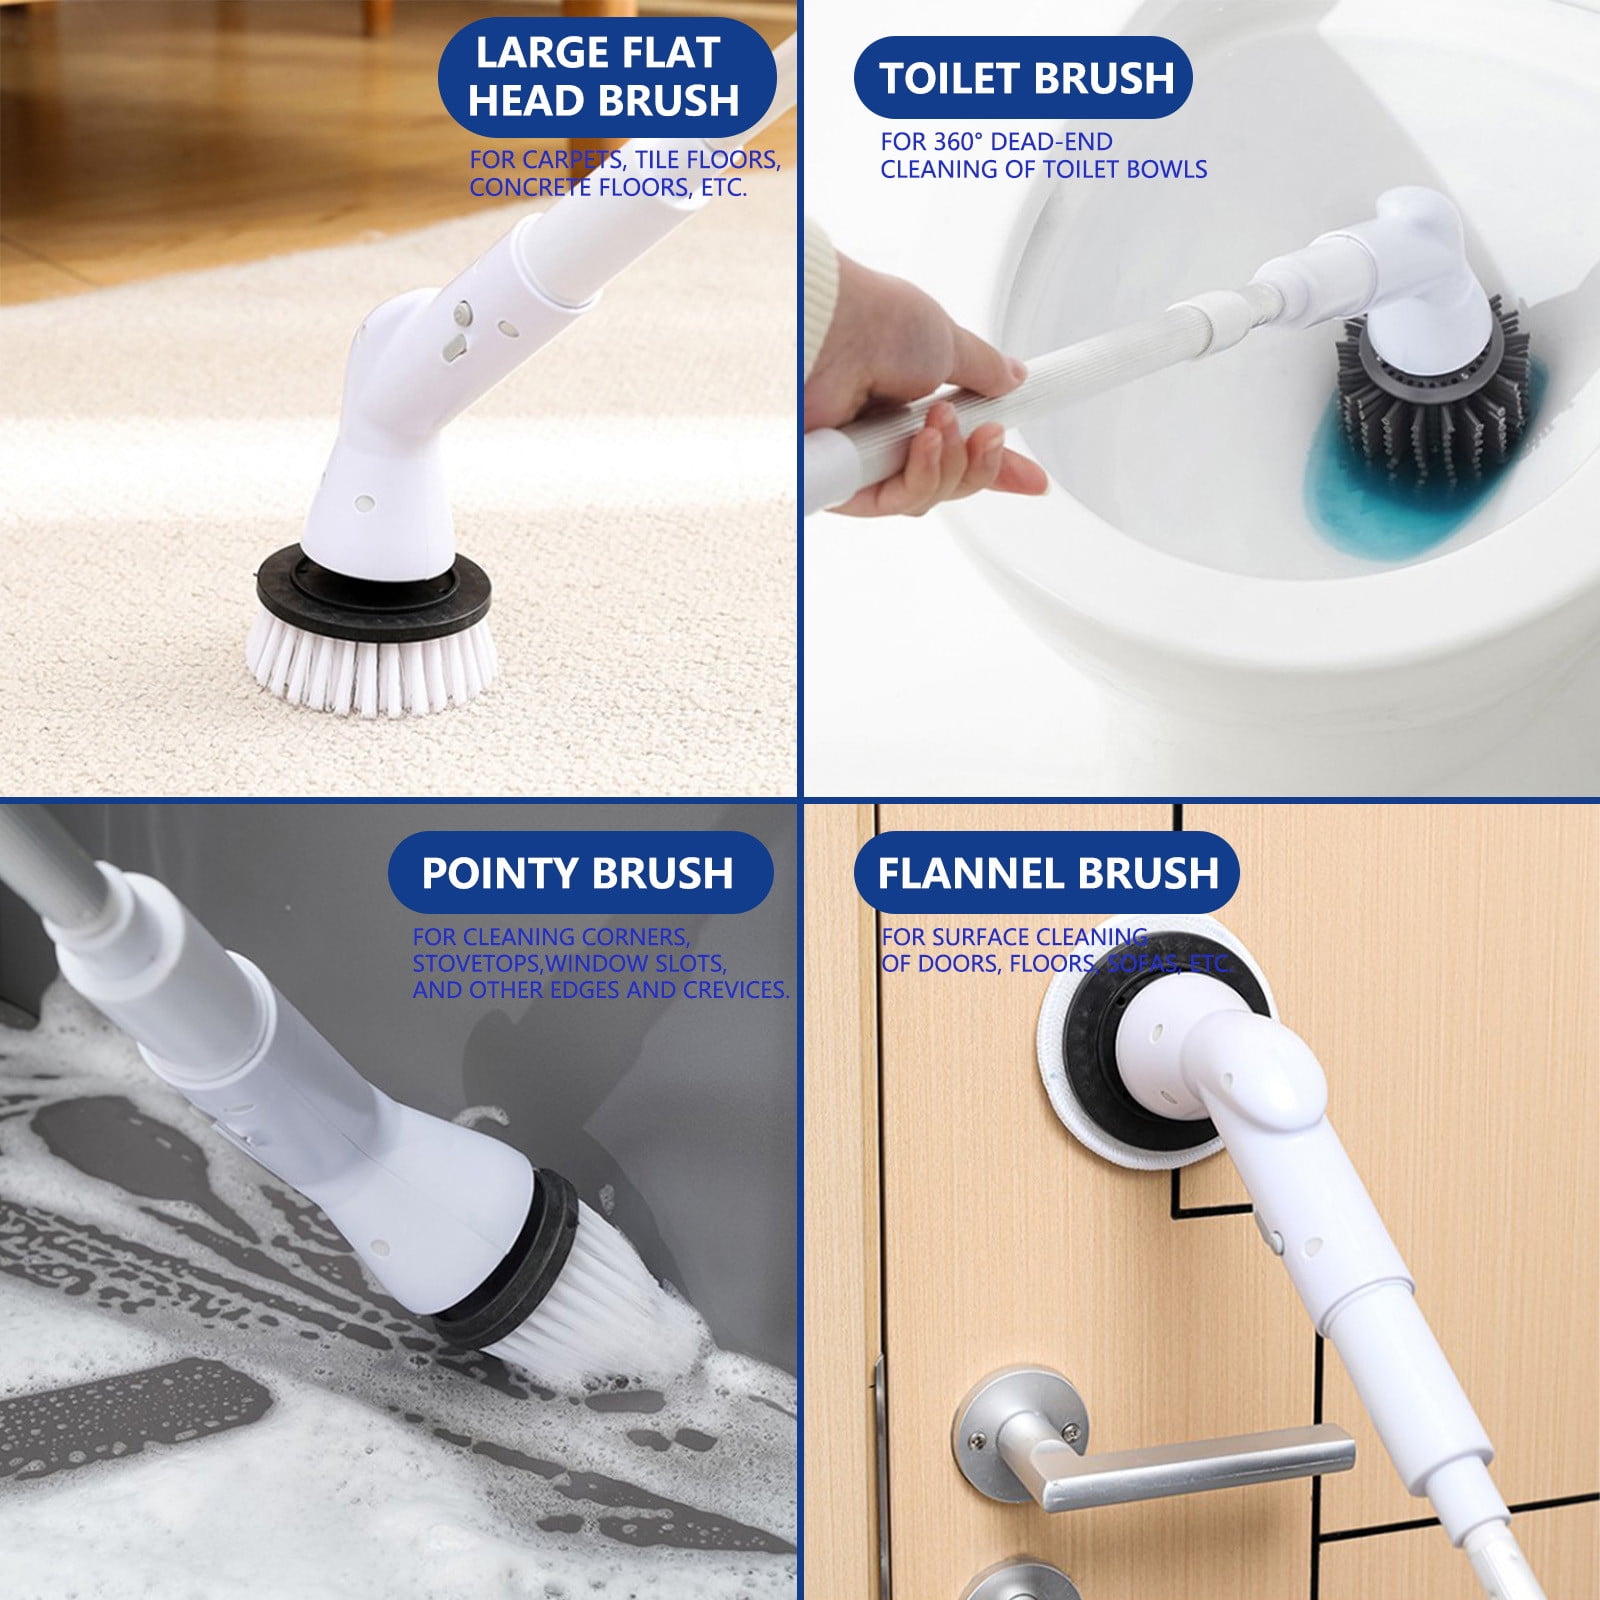 Dpityserensio Electric Spin Scrubbers,Cordless Spin Scrubbers with 4 Replaceable Brush Heads and Adjust Extension Handle,Power Cleaning Brush for